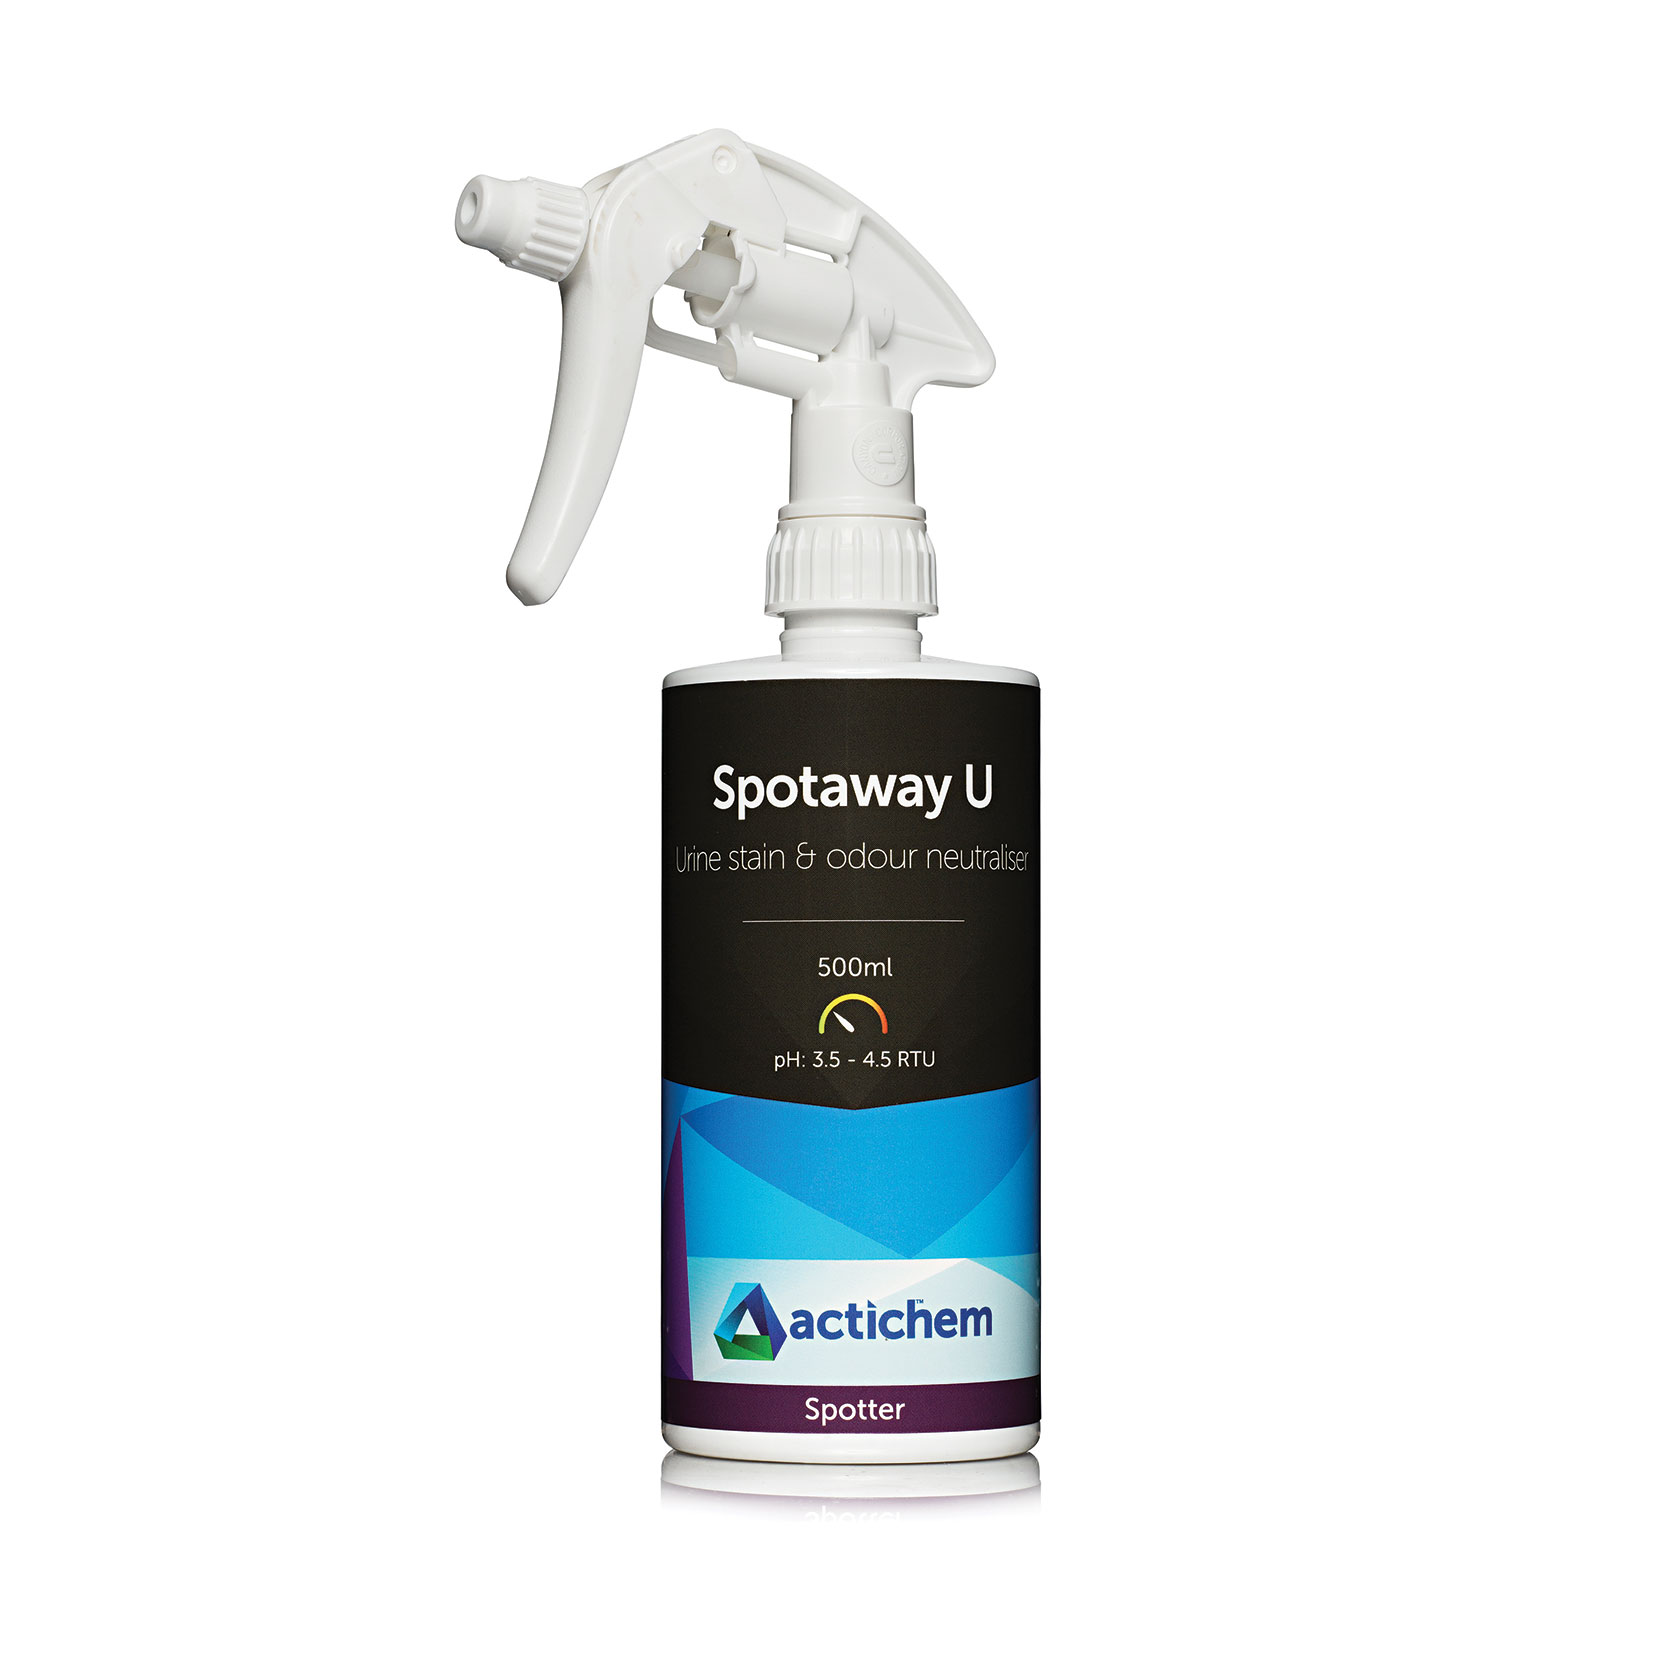 Spotaway U - Peroxide powered urine stain remover - Actichem